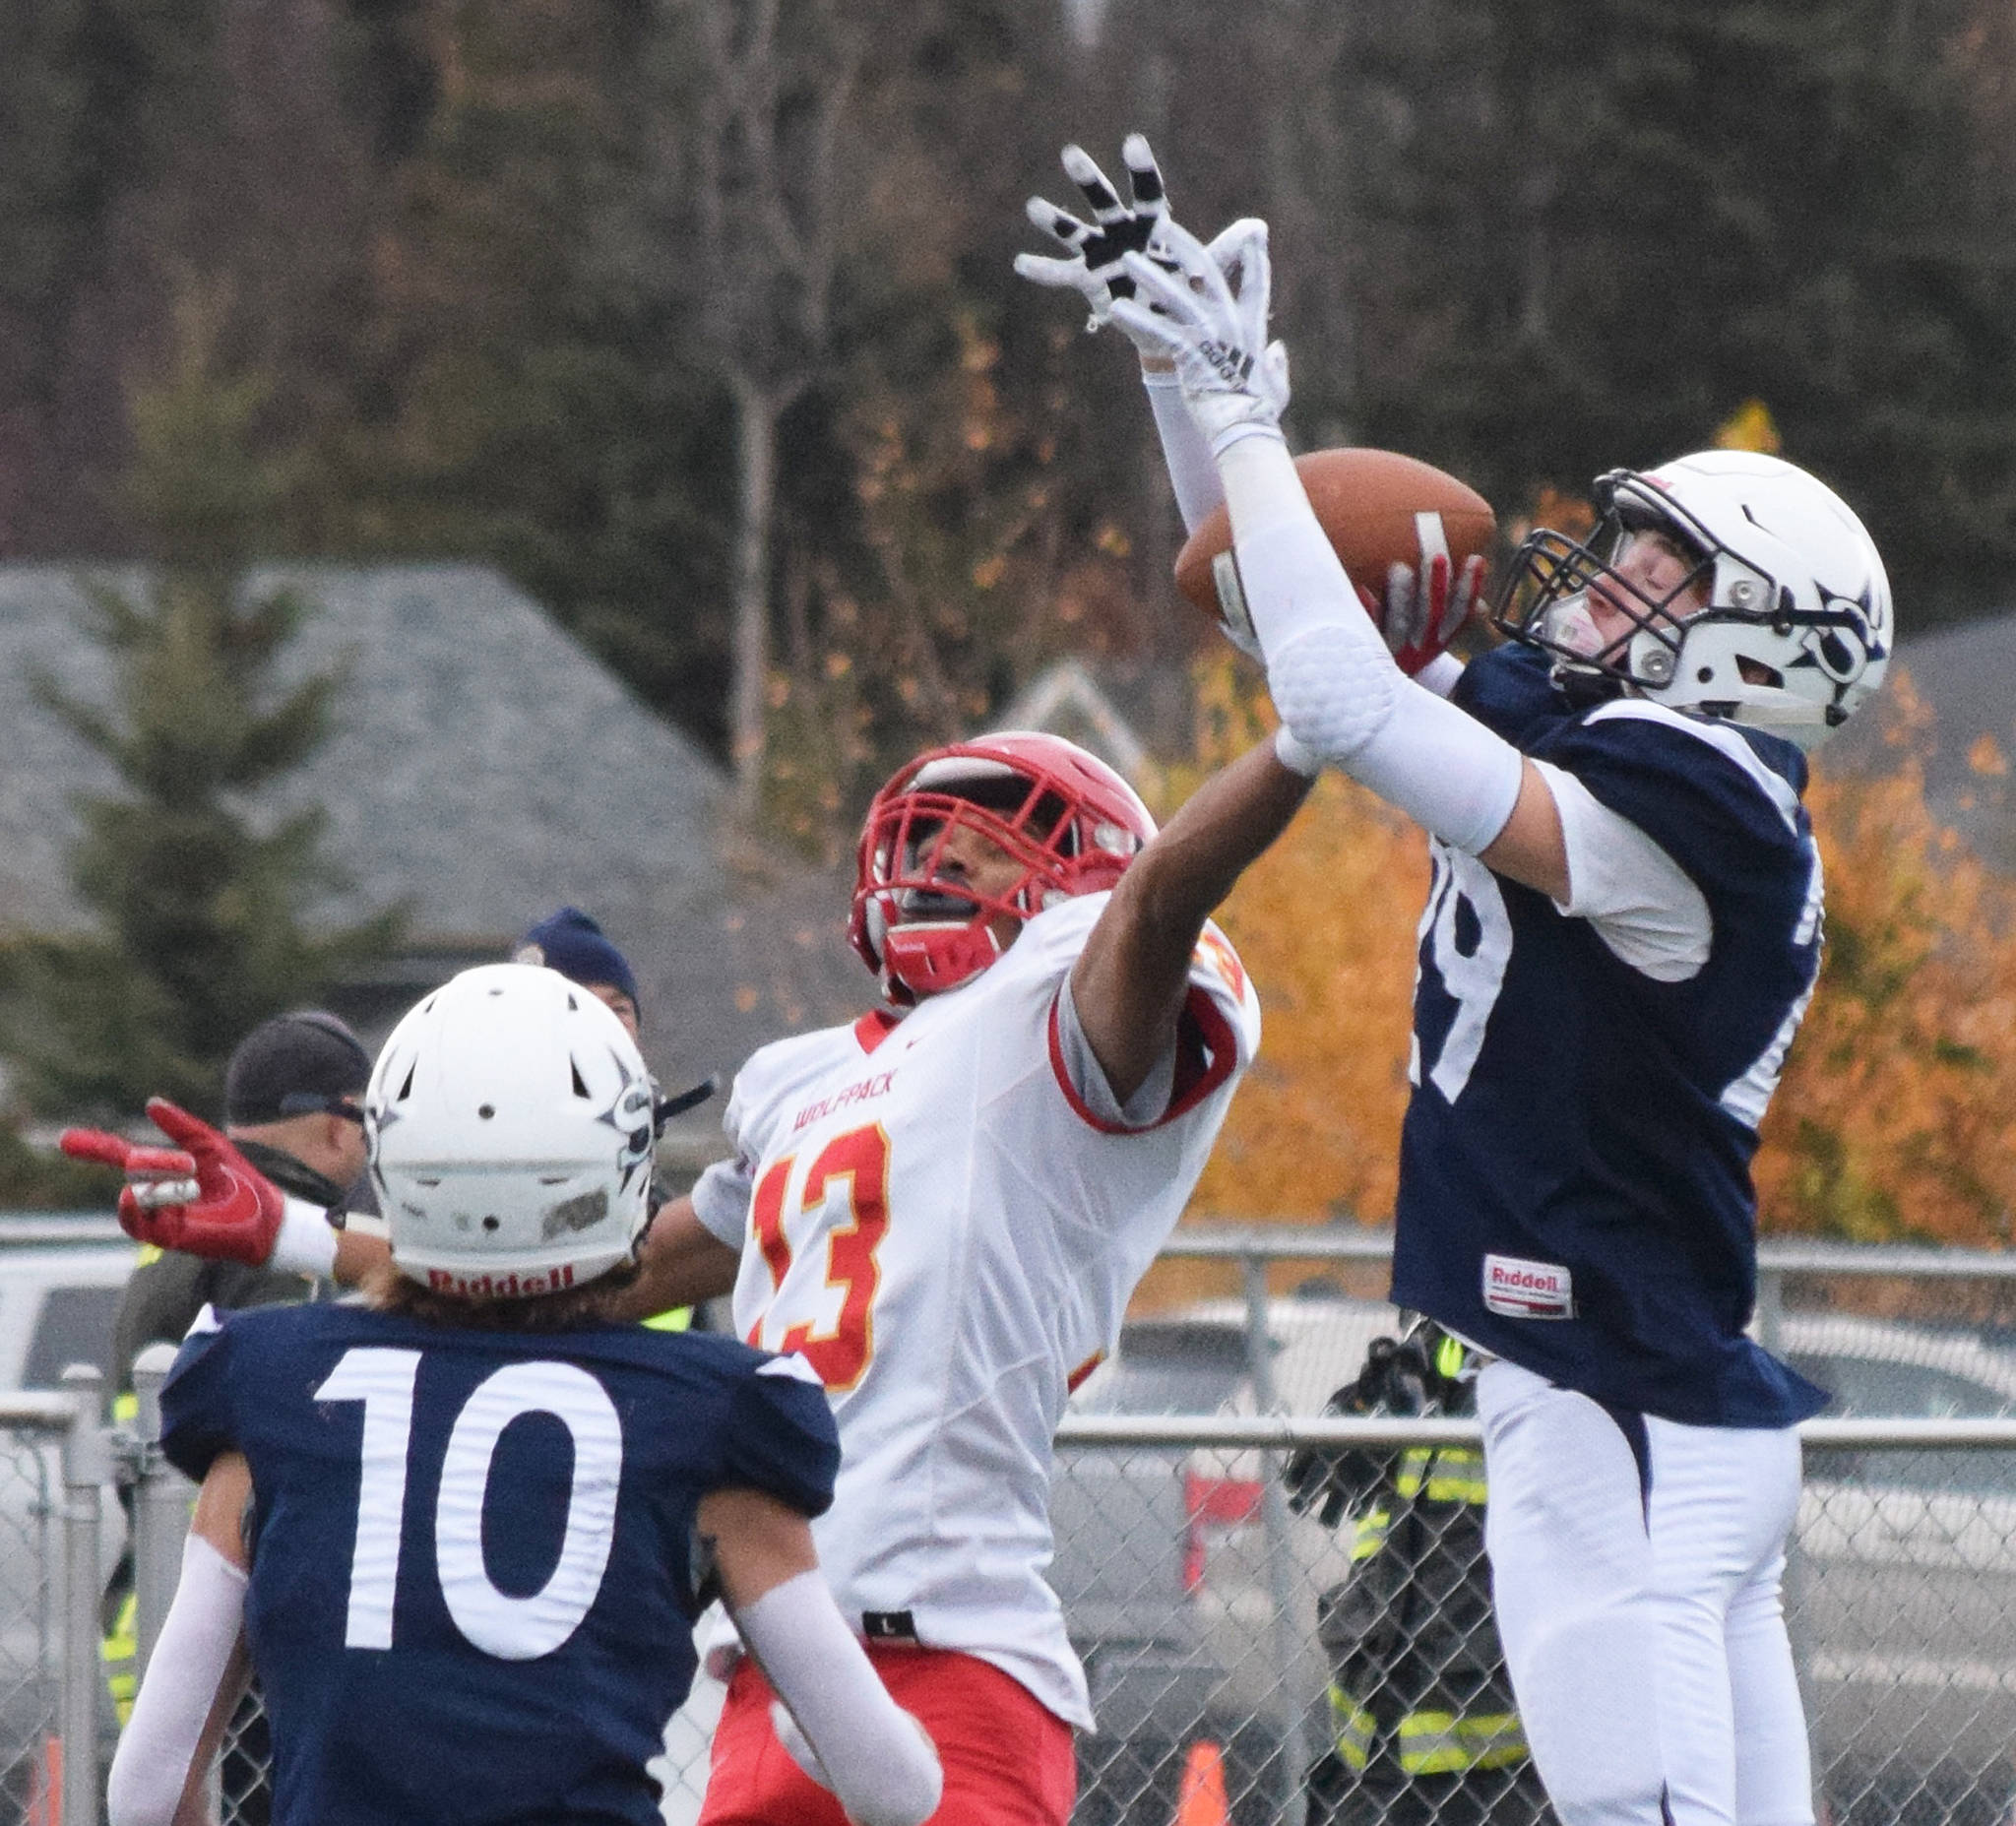 West Valley’s Tyriq Nance makes a one-handed touchdown grab in front of Soldotna’s Tyler Morrison (right) in a Div. II state semifinal Friday, Oct. 11, 2019, in Soldotna, Alaska. (Photo by Joey Klecka/Peninsula Clarion)